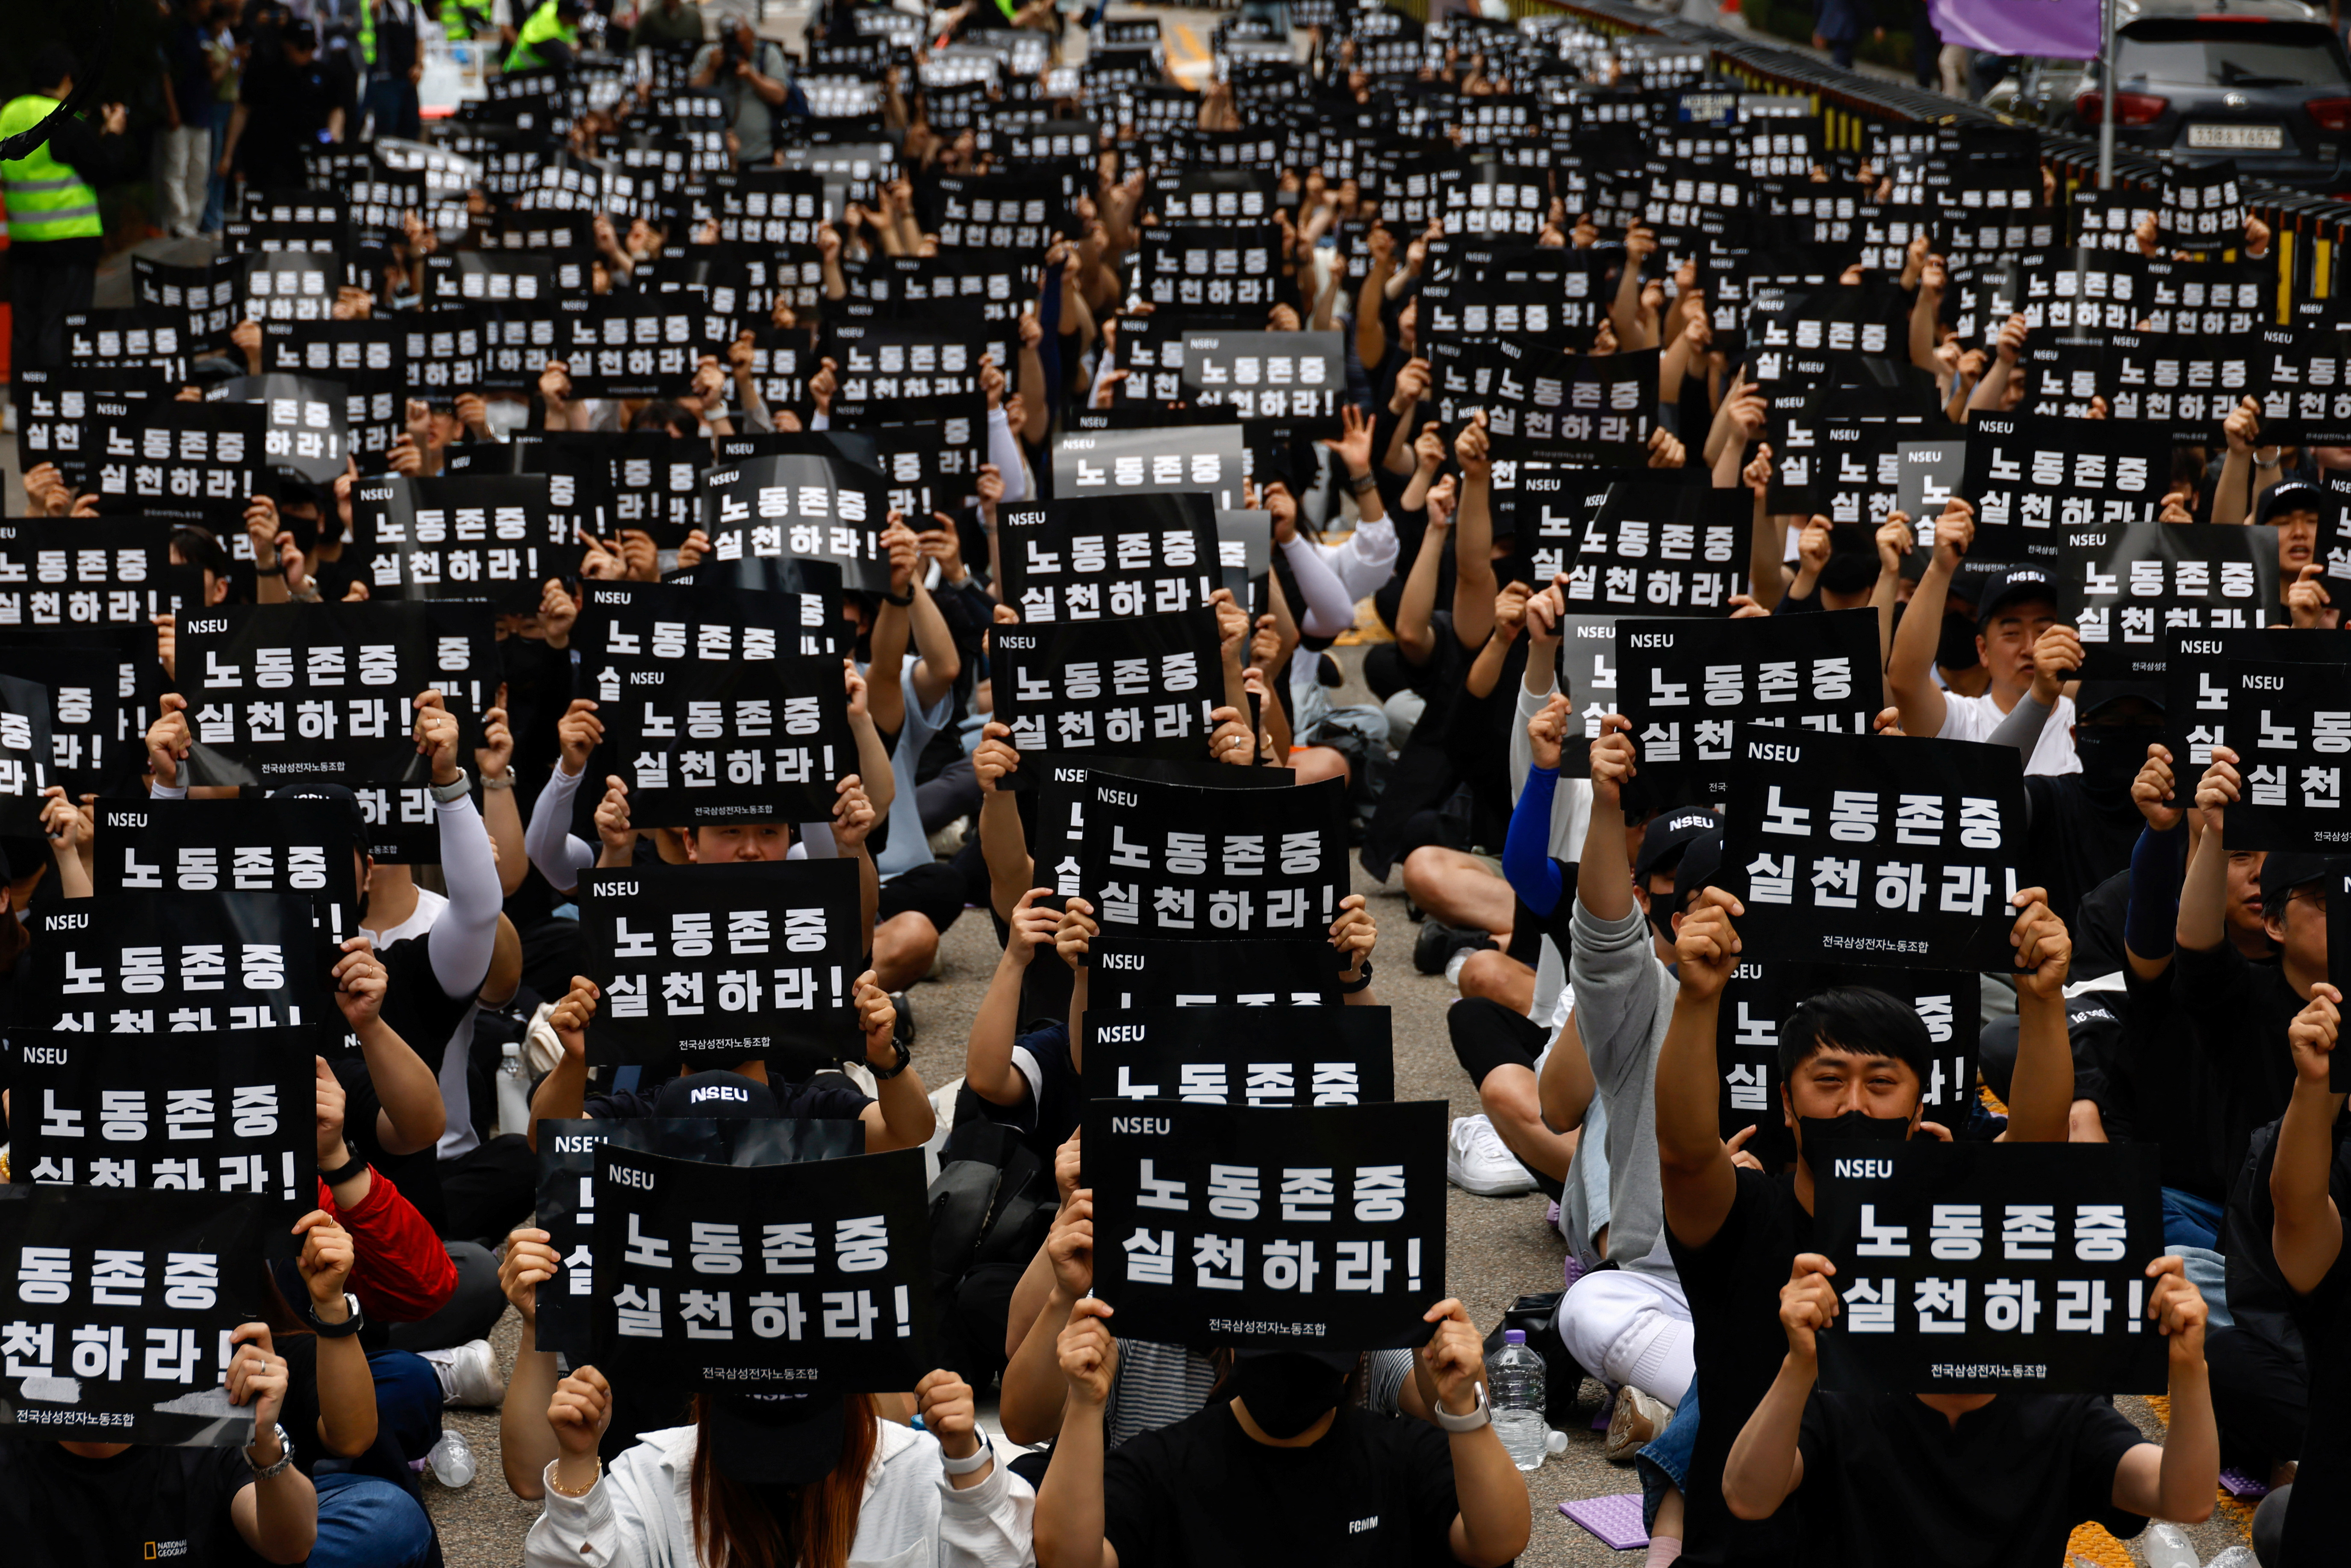 The National Samsung Electronics Union (NSEU) hold a rare protest for fair treatment, in Seoul